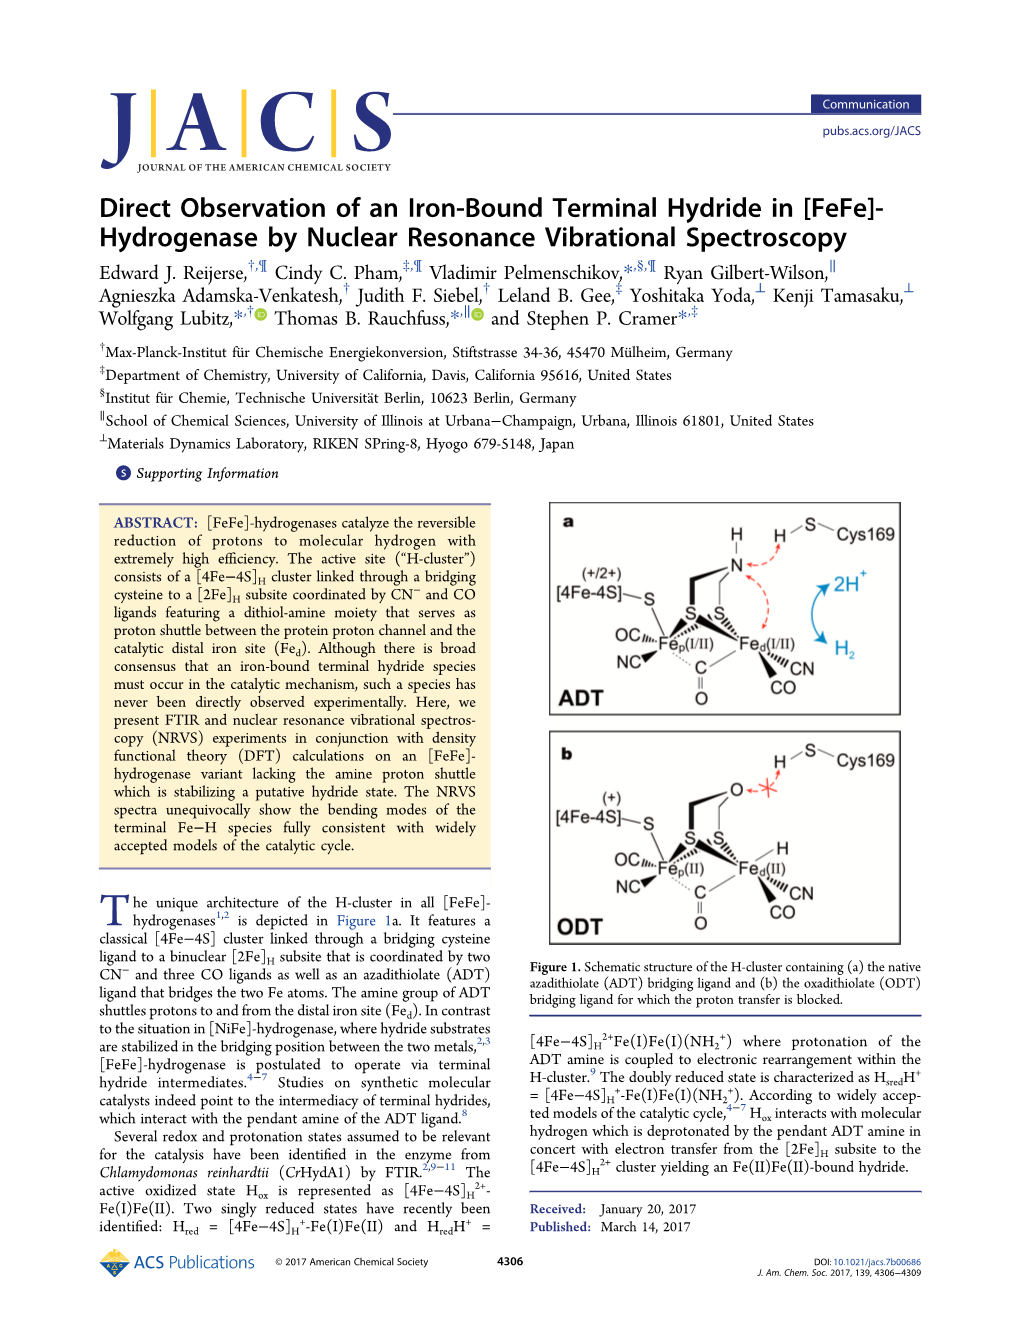 Direct Observation of an Iron-Bound Terminal Hydride in [Fefe]- Hydrogenase by Nuclear Resonance Vibrational Spectroscopy † ¶ ‡ ¶ § ¶ ∥ Edward J